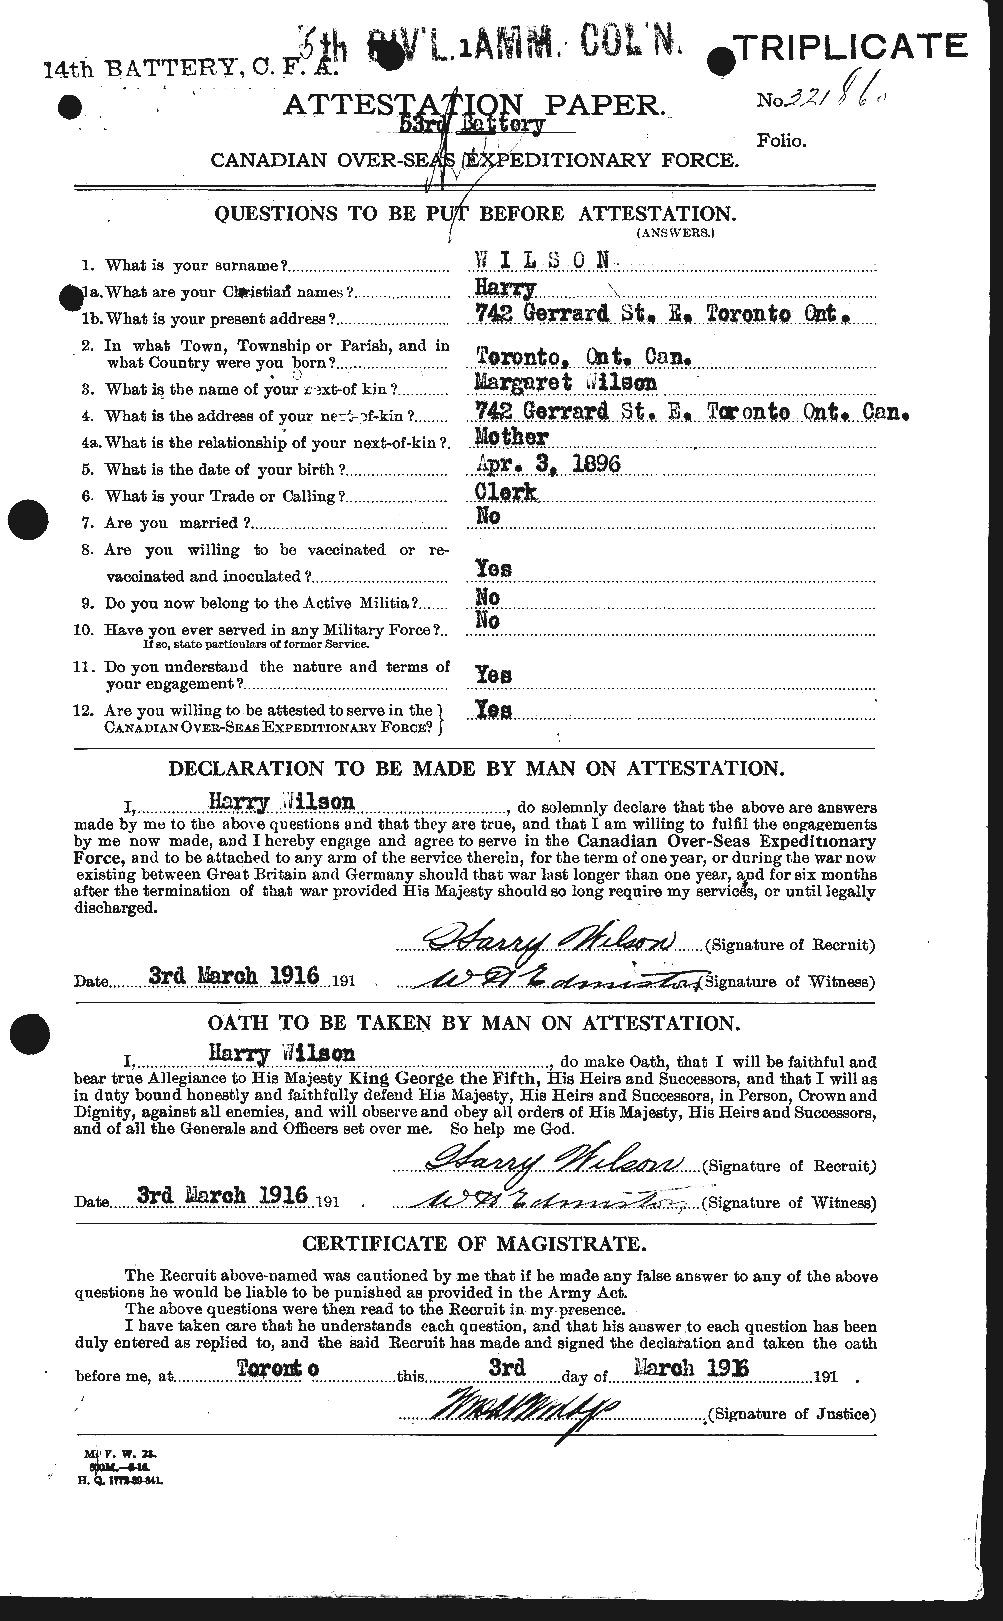 Personnel Records of the First World War - CEF 679452a